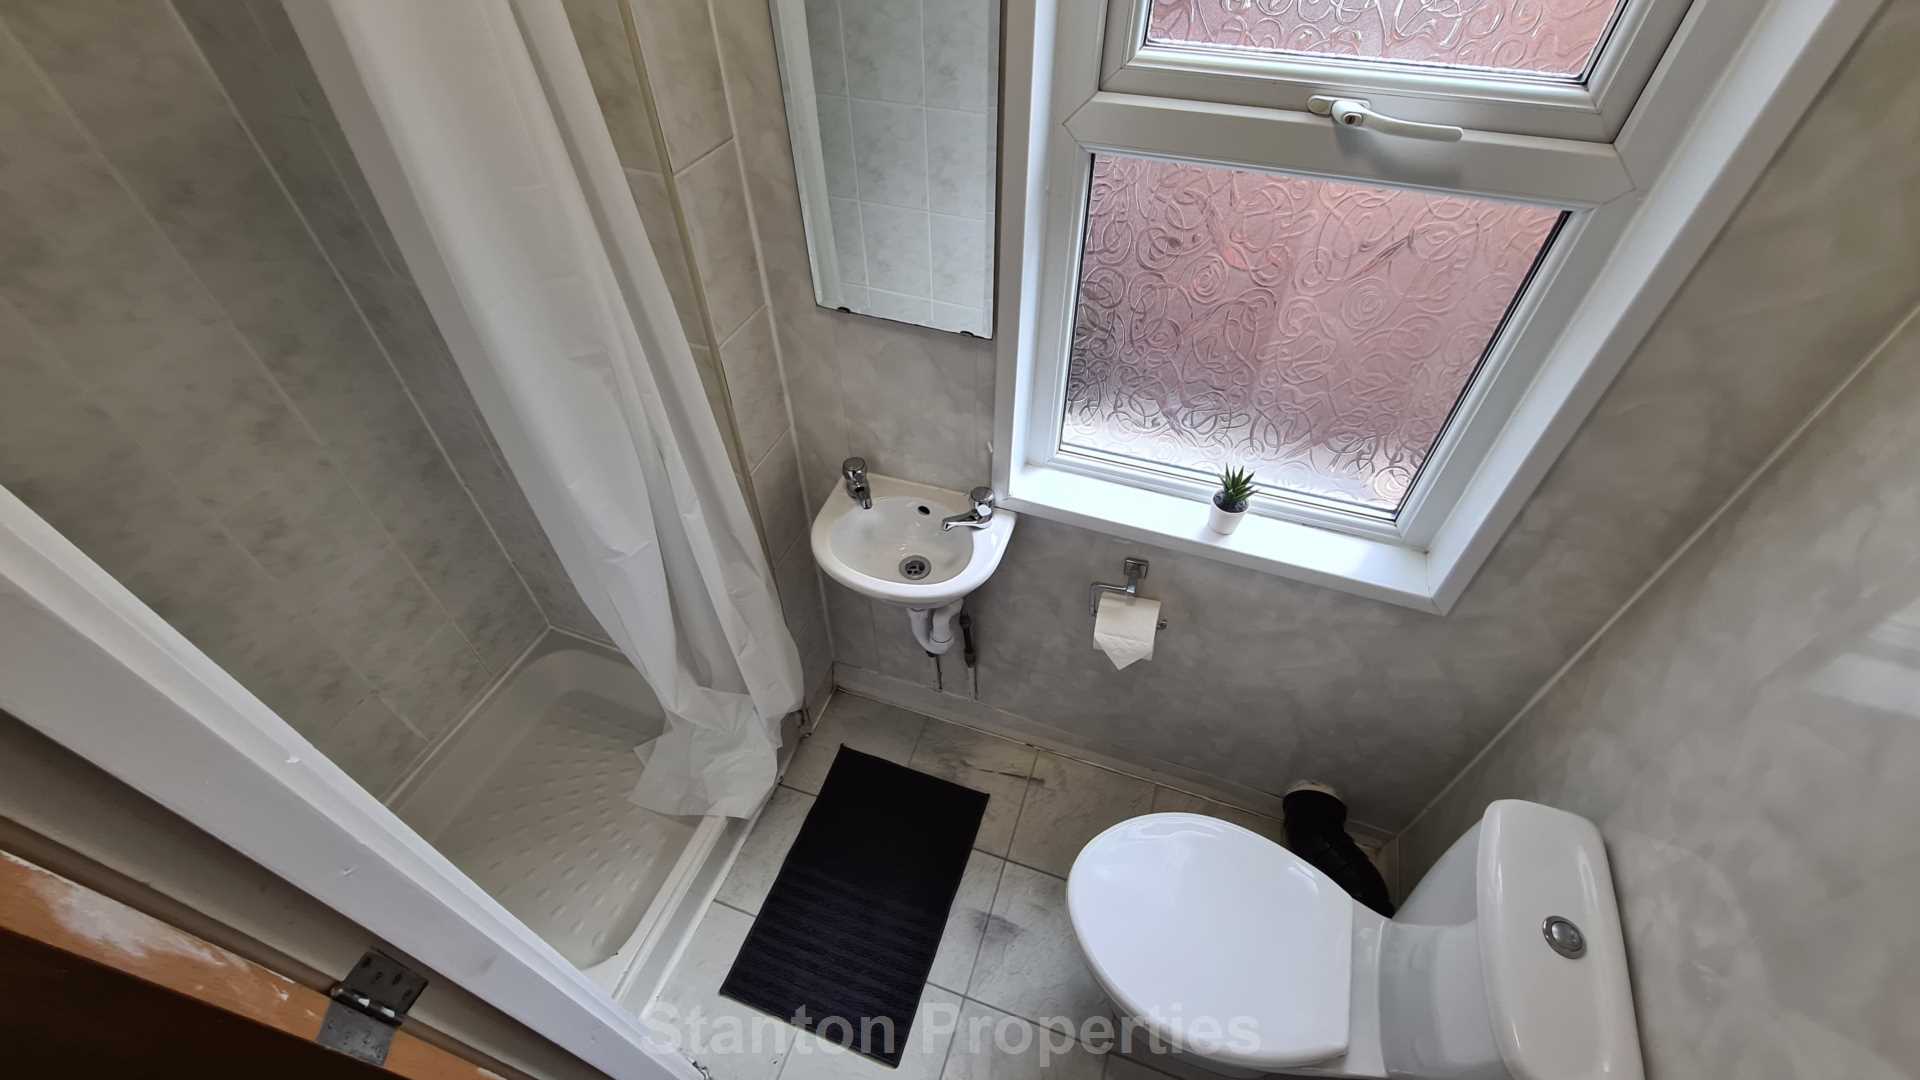 £137 pppw, See Video Tour, Lombard Grove, Fallowfield, Image 7